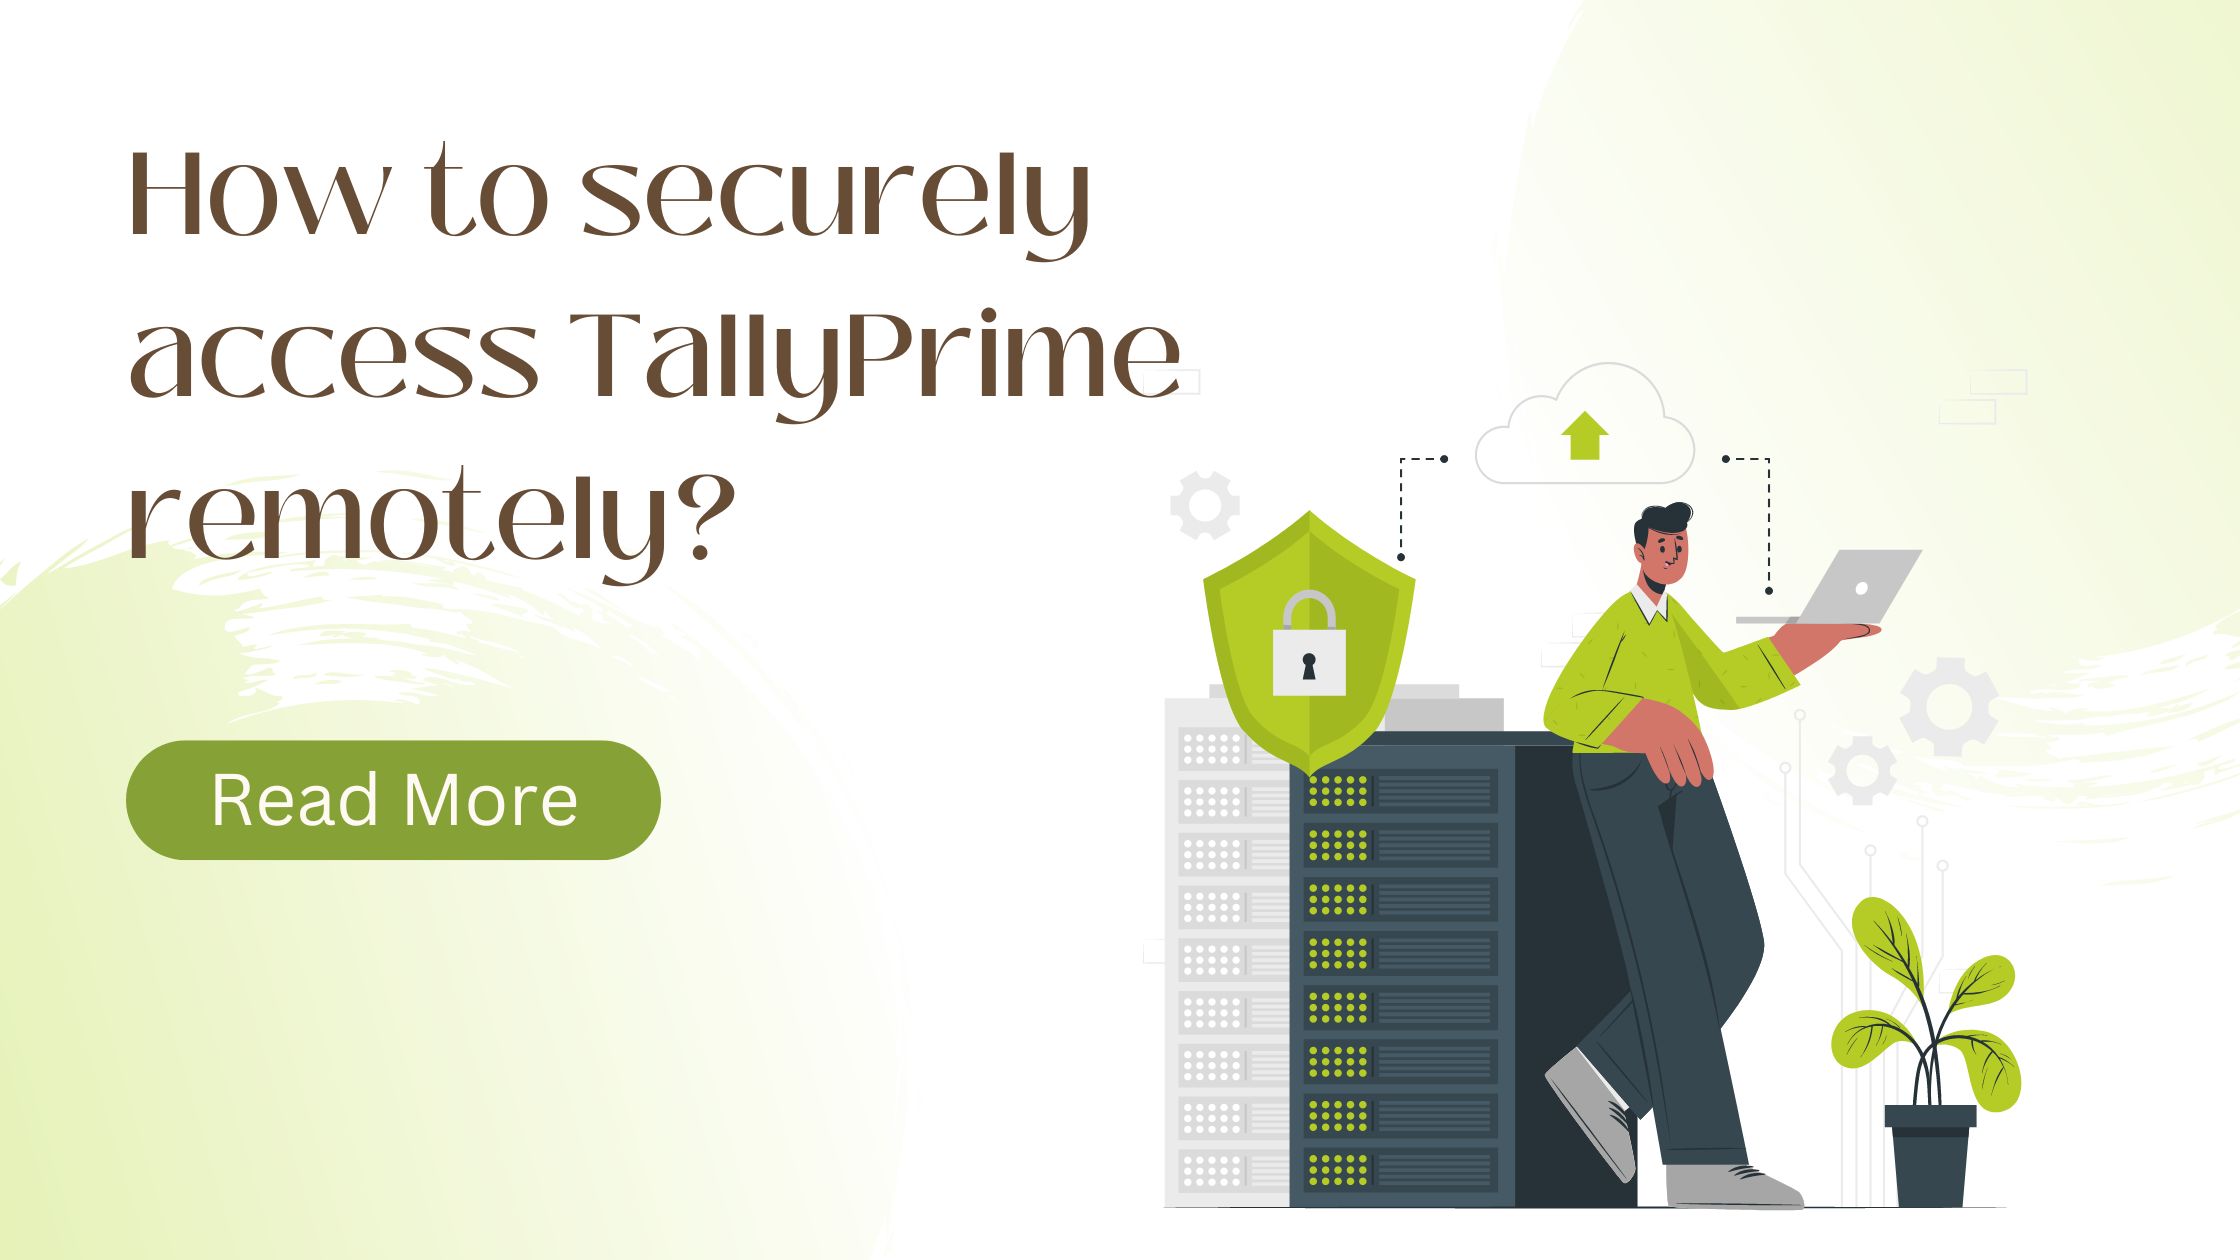 tallyprime secured remote access